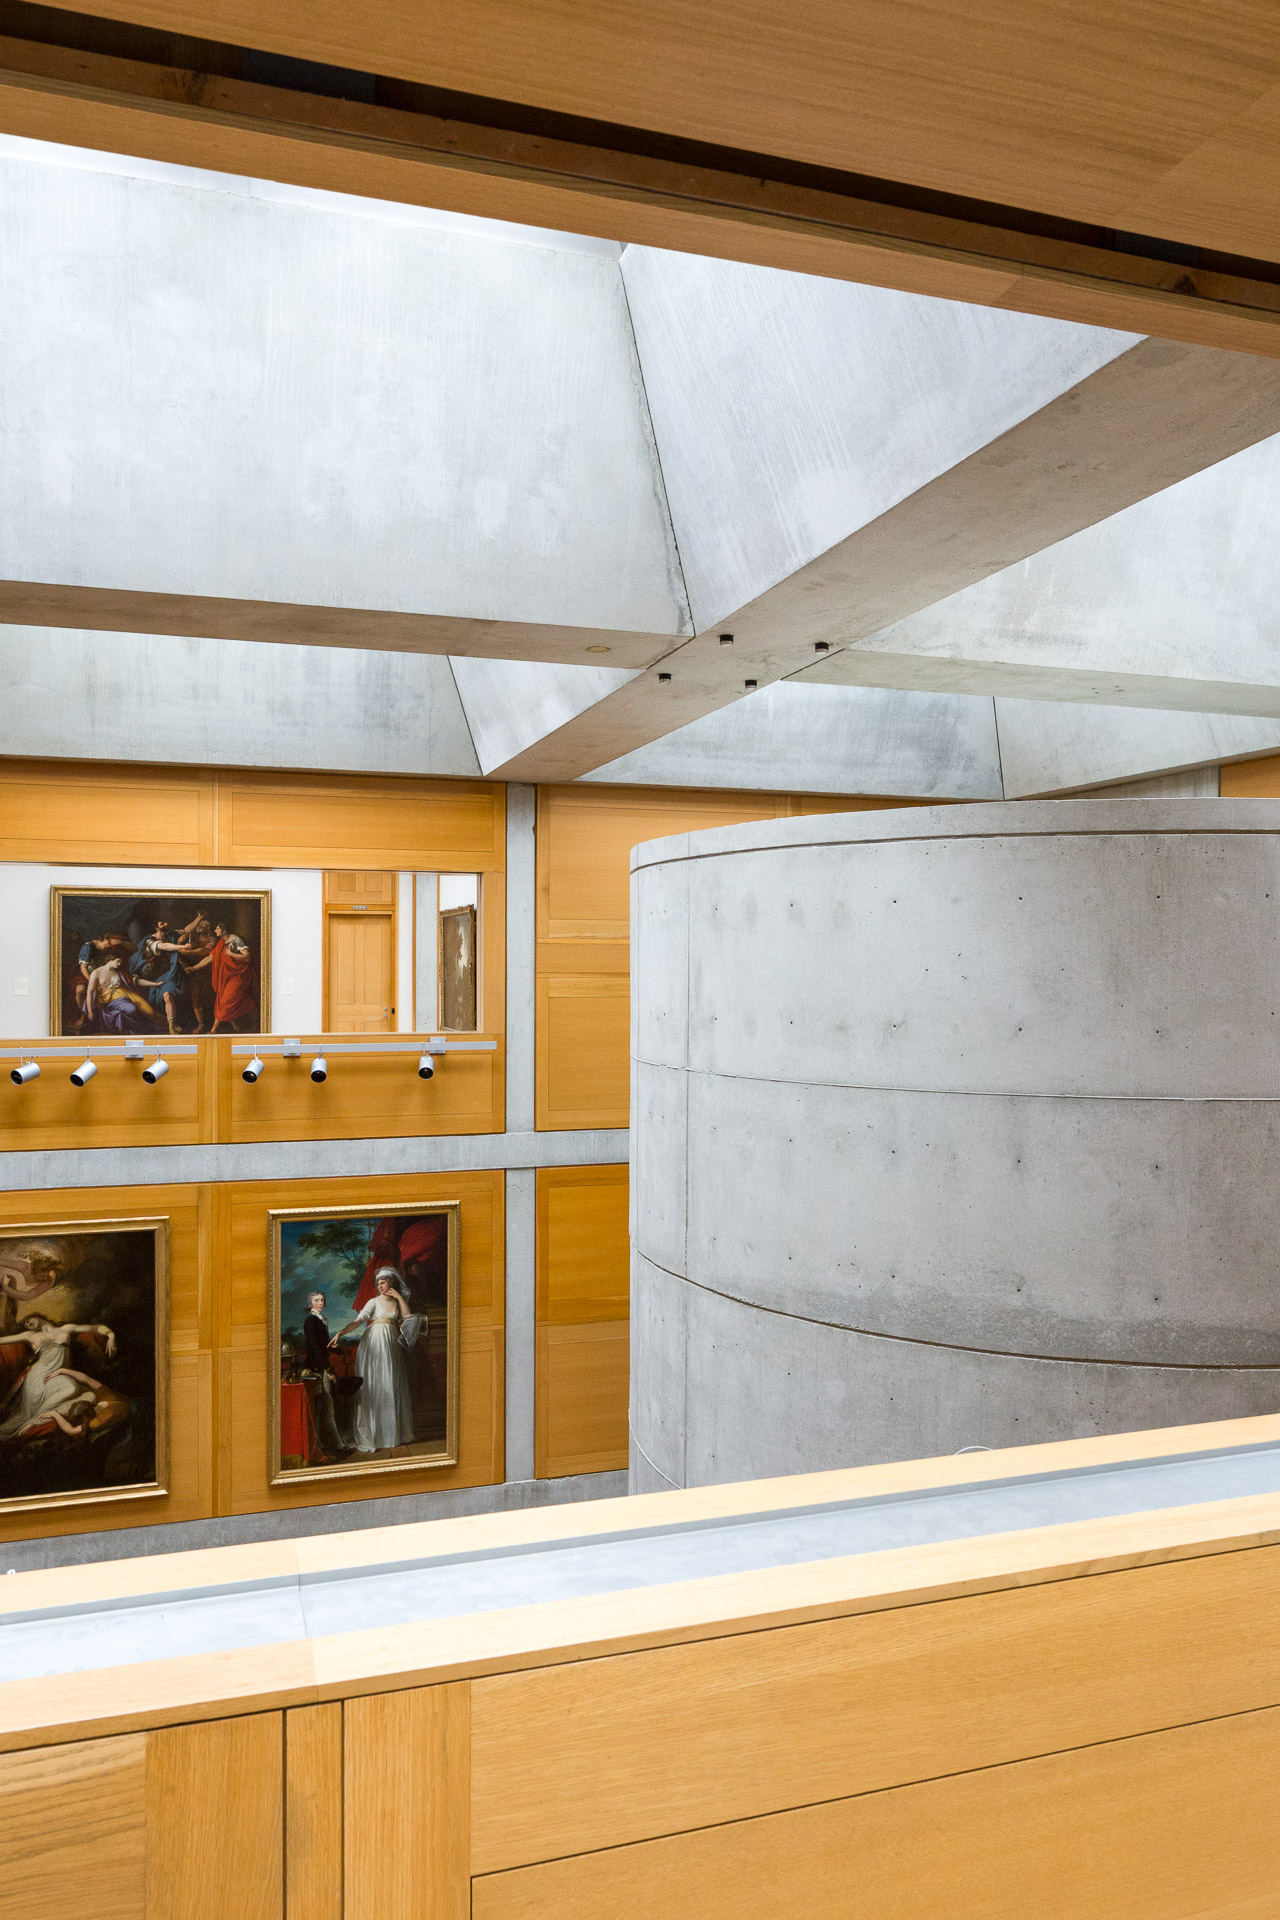 Interior of Yale Center for British Art in New Haven, CT by Louis Kahn. Photo by Jason R. Woods.